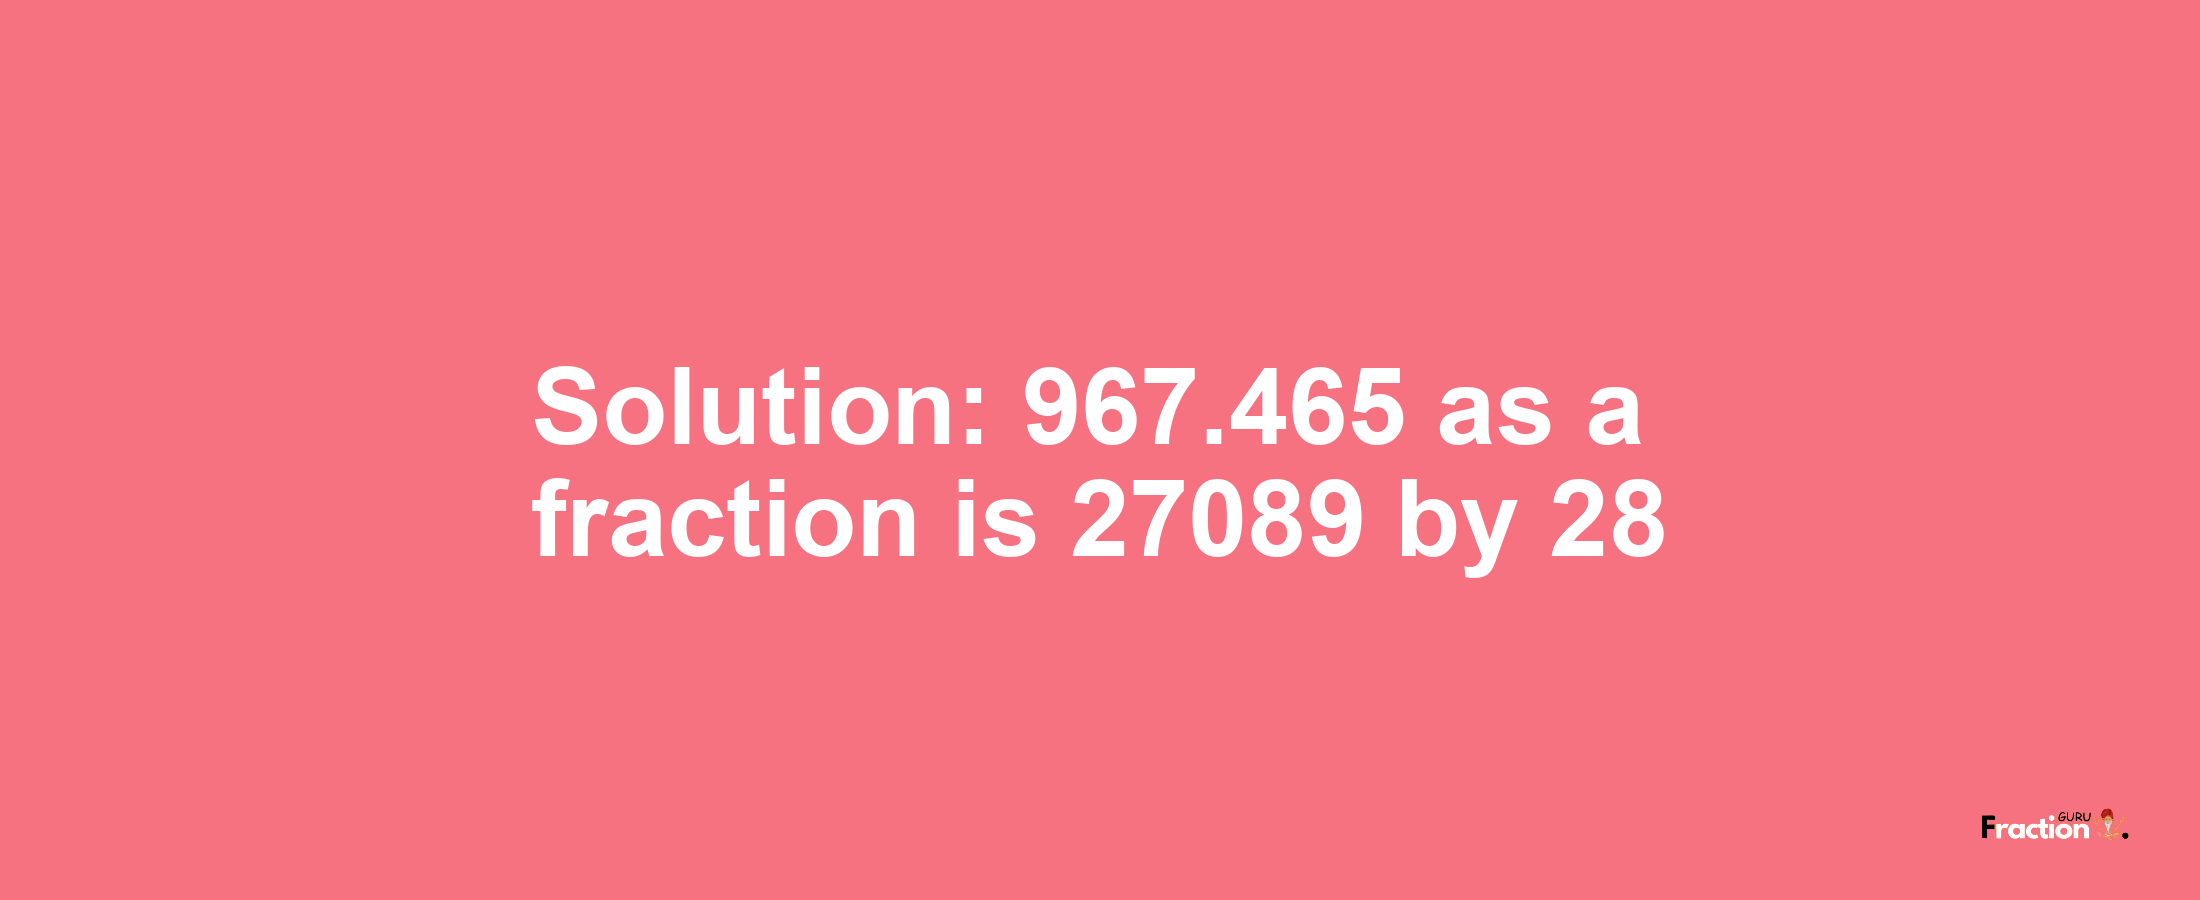 Solution:967.465 as a fraction is 27089/28